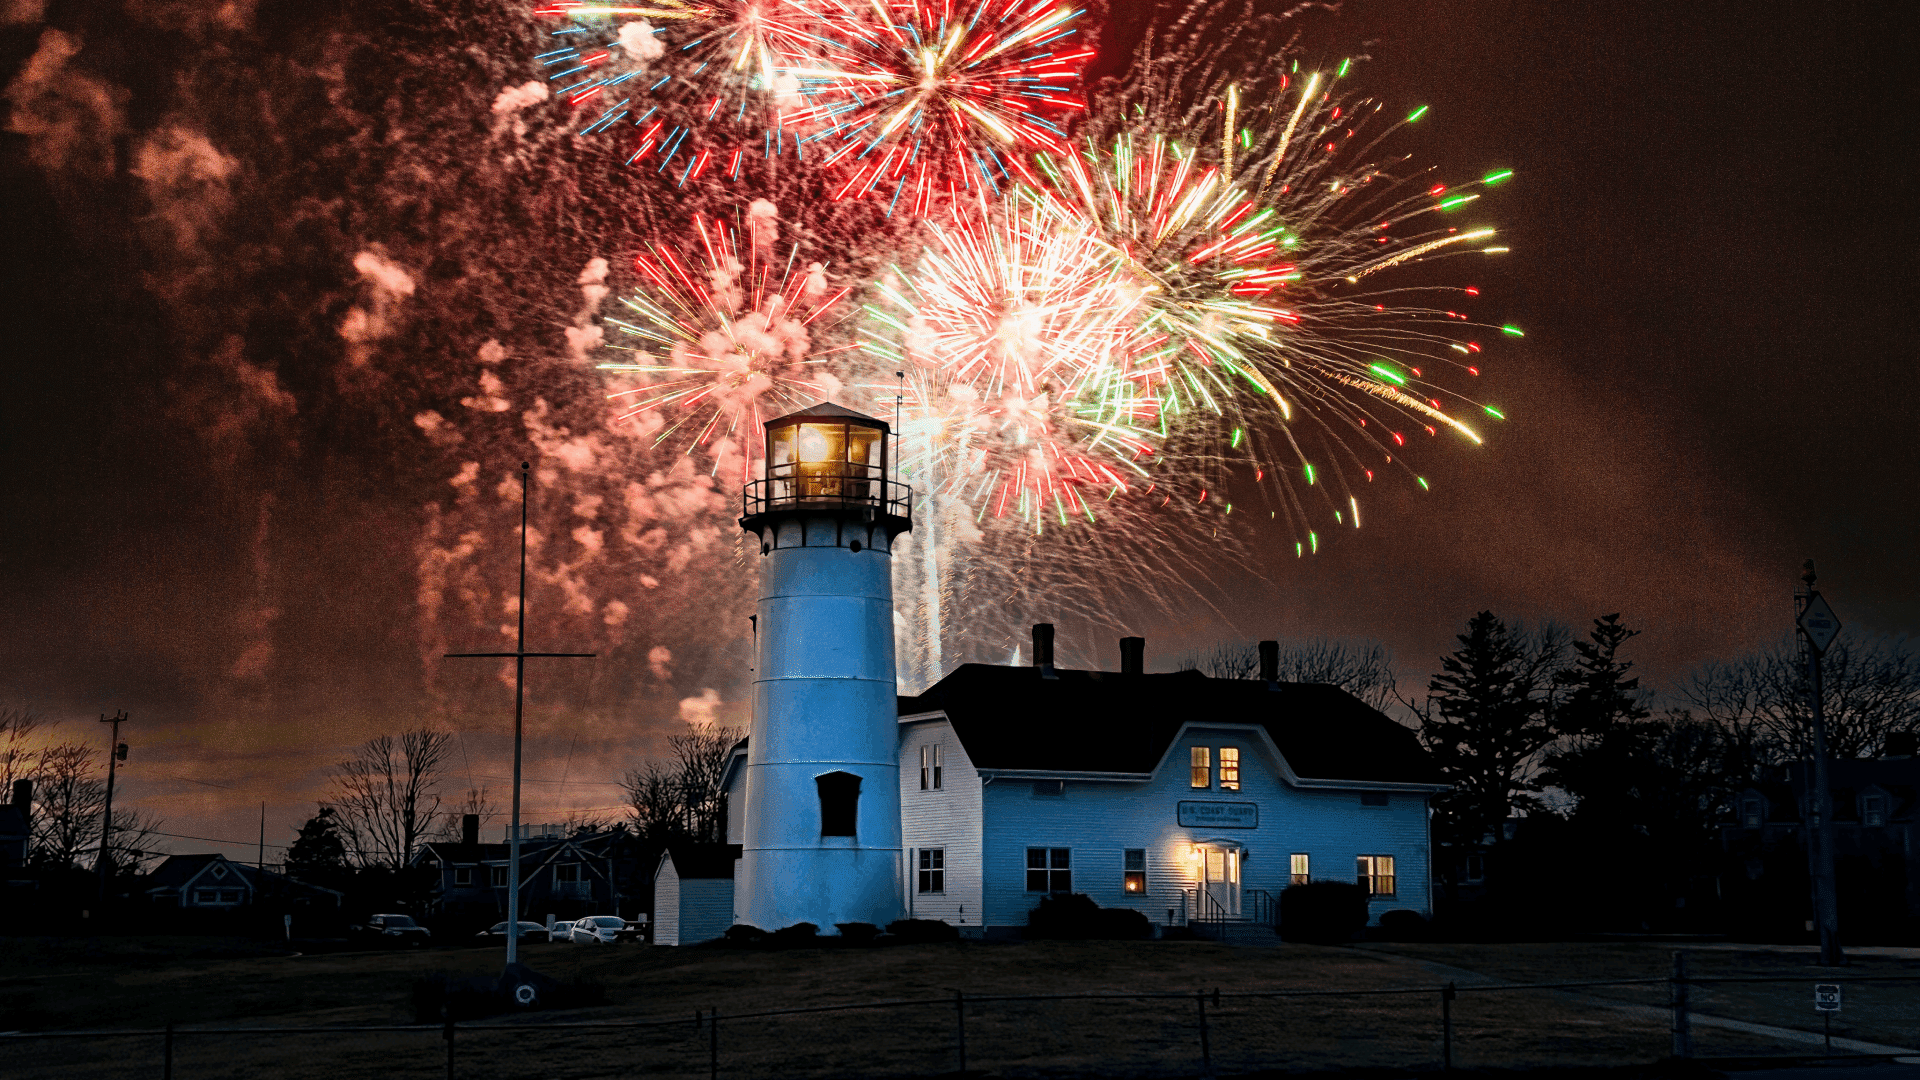 Chatham Lighthouse with fireworks